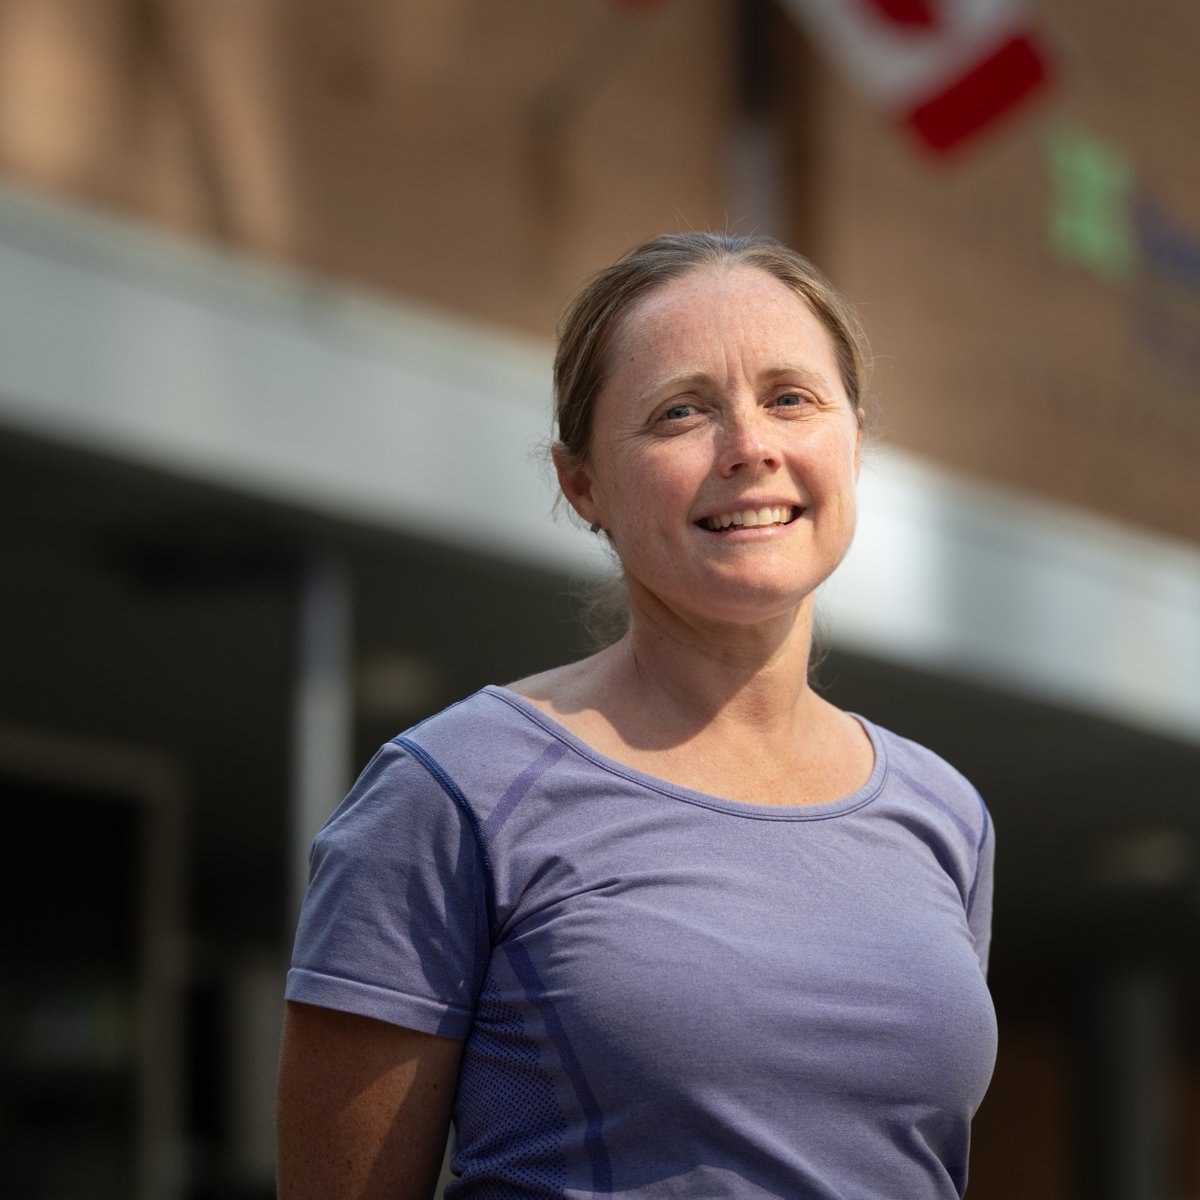 October is Occupational Therapy (OT) Month! Sunnybrook is proud to recognize the many OTs providing leading care to patients. Read more about the experiences of Rachel Davies, OT with Sunnybrook’s Holland Bone and Joint Program. health.sunnybrook.ca/featured/how-t…